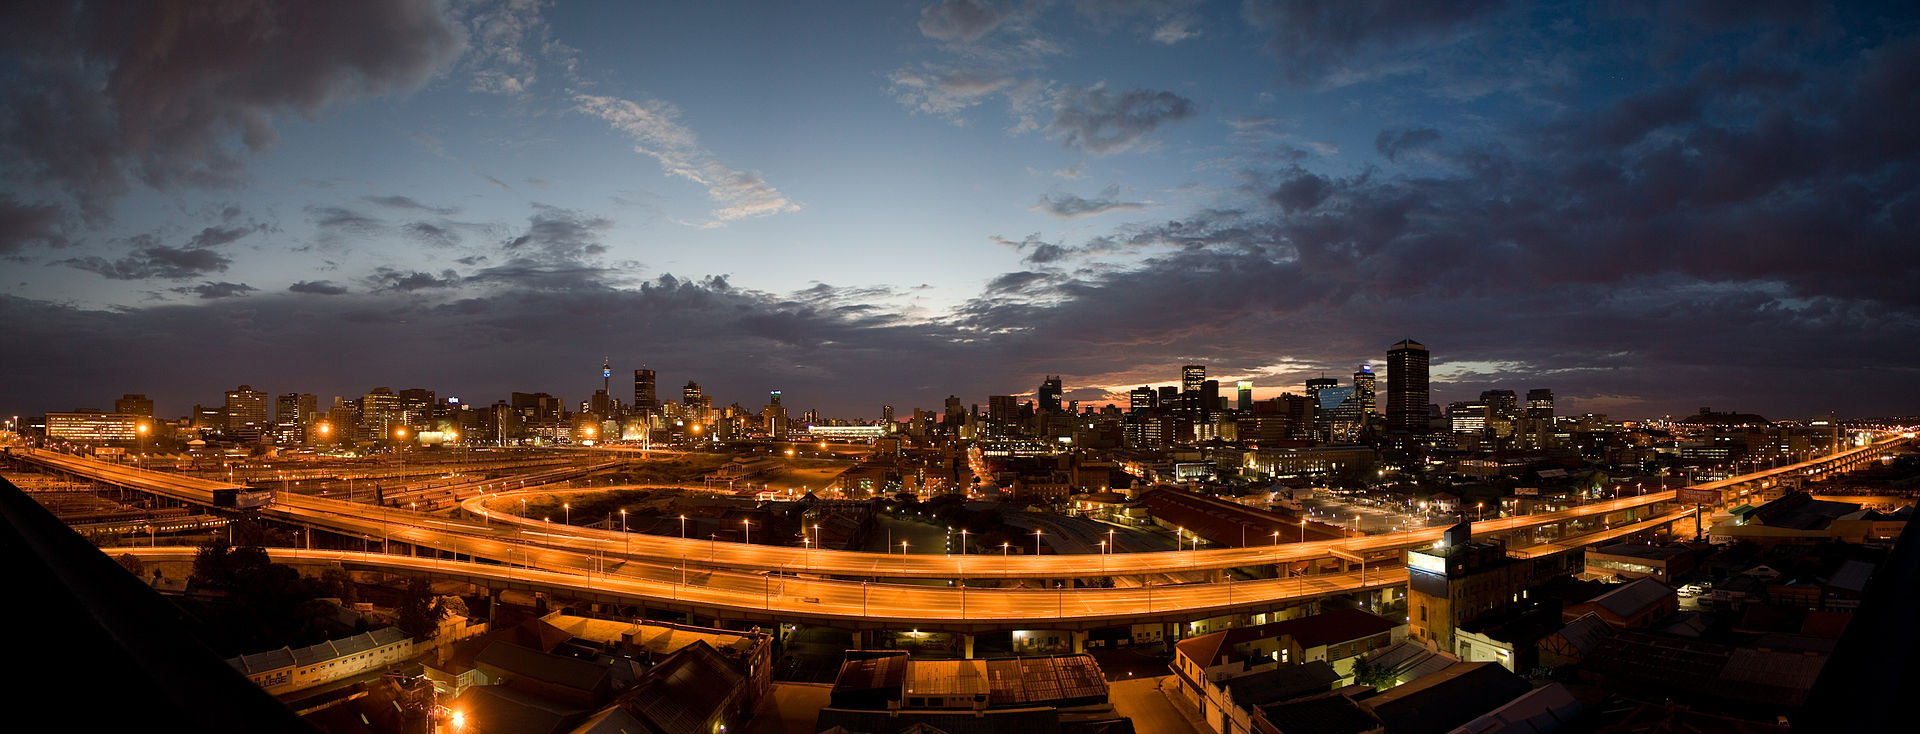 Johannesburg_Sunrise,_City_of_Gold by dylan harbour 2008